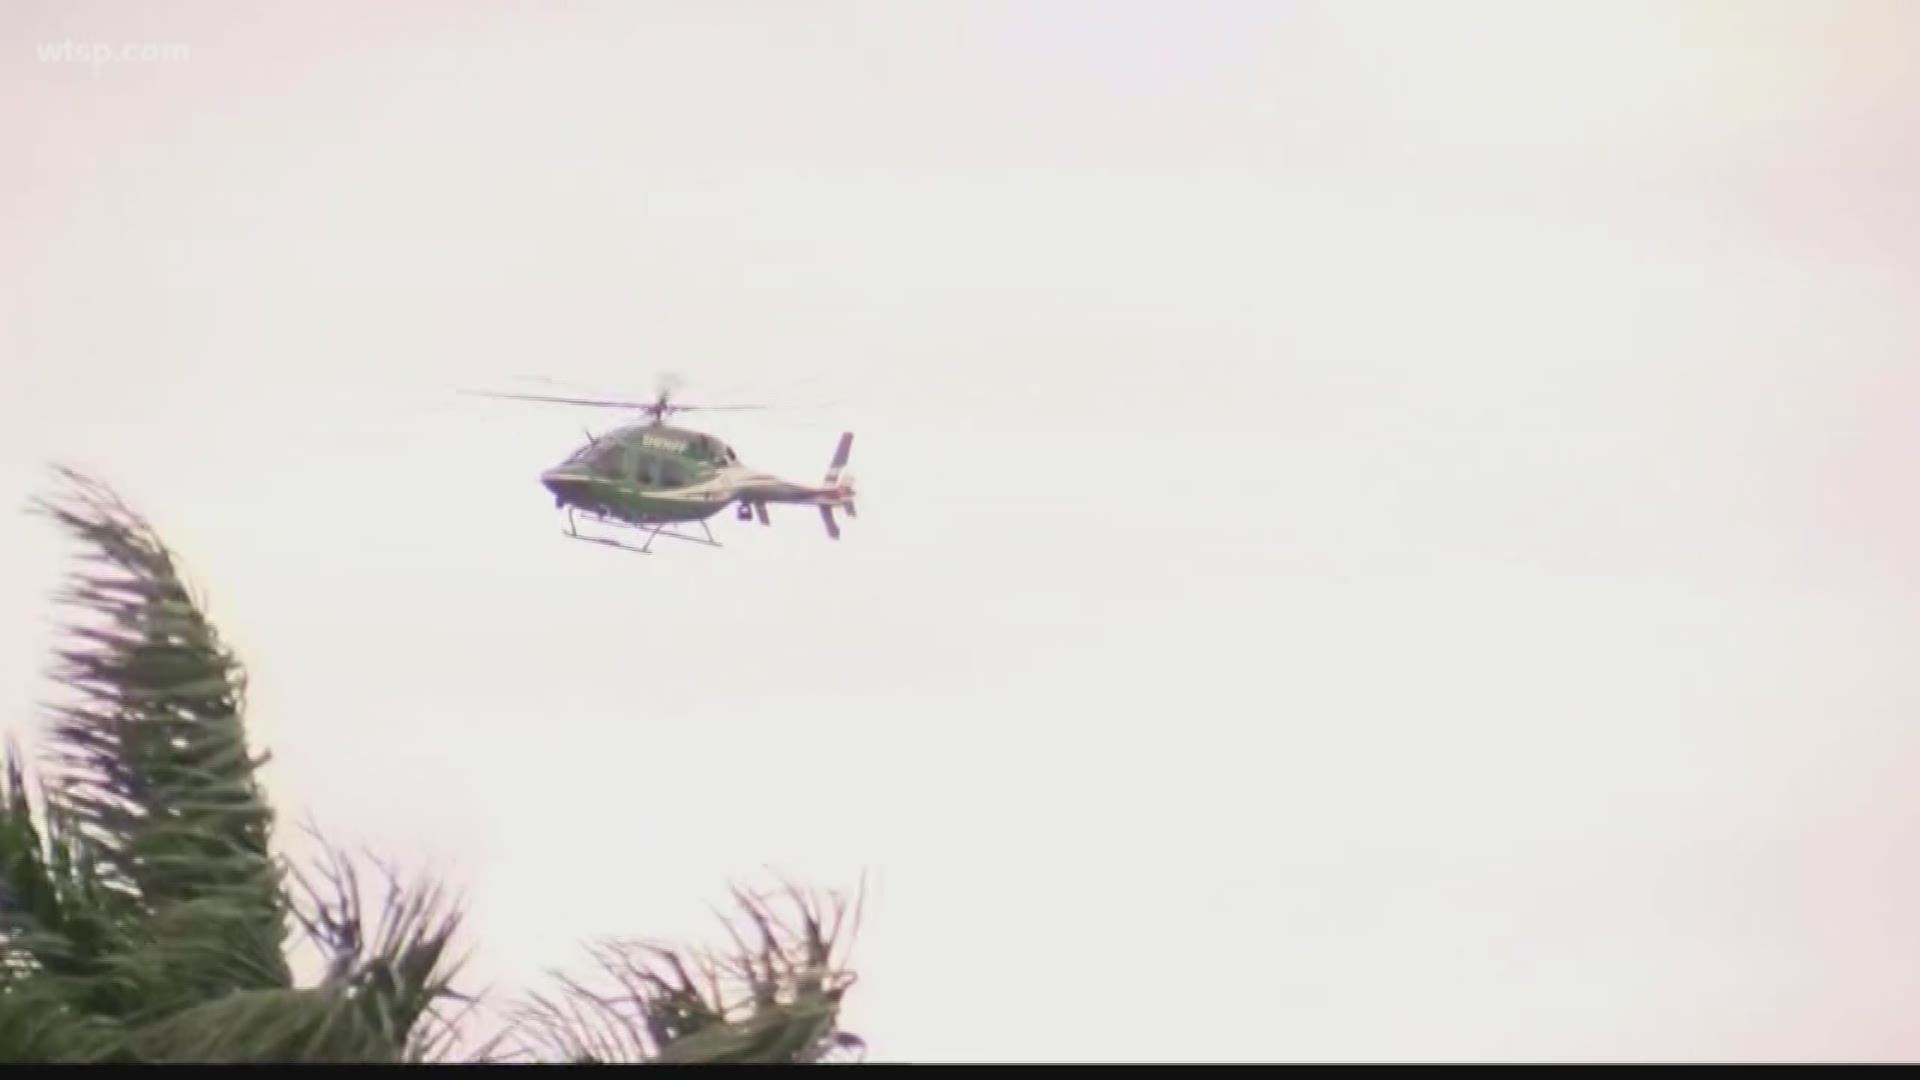 Federal officials say the pilot was trying to reach an airport when the plane crashed into Lake Okeechobee.